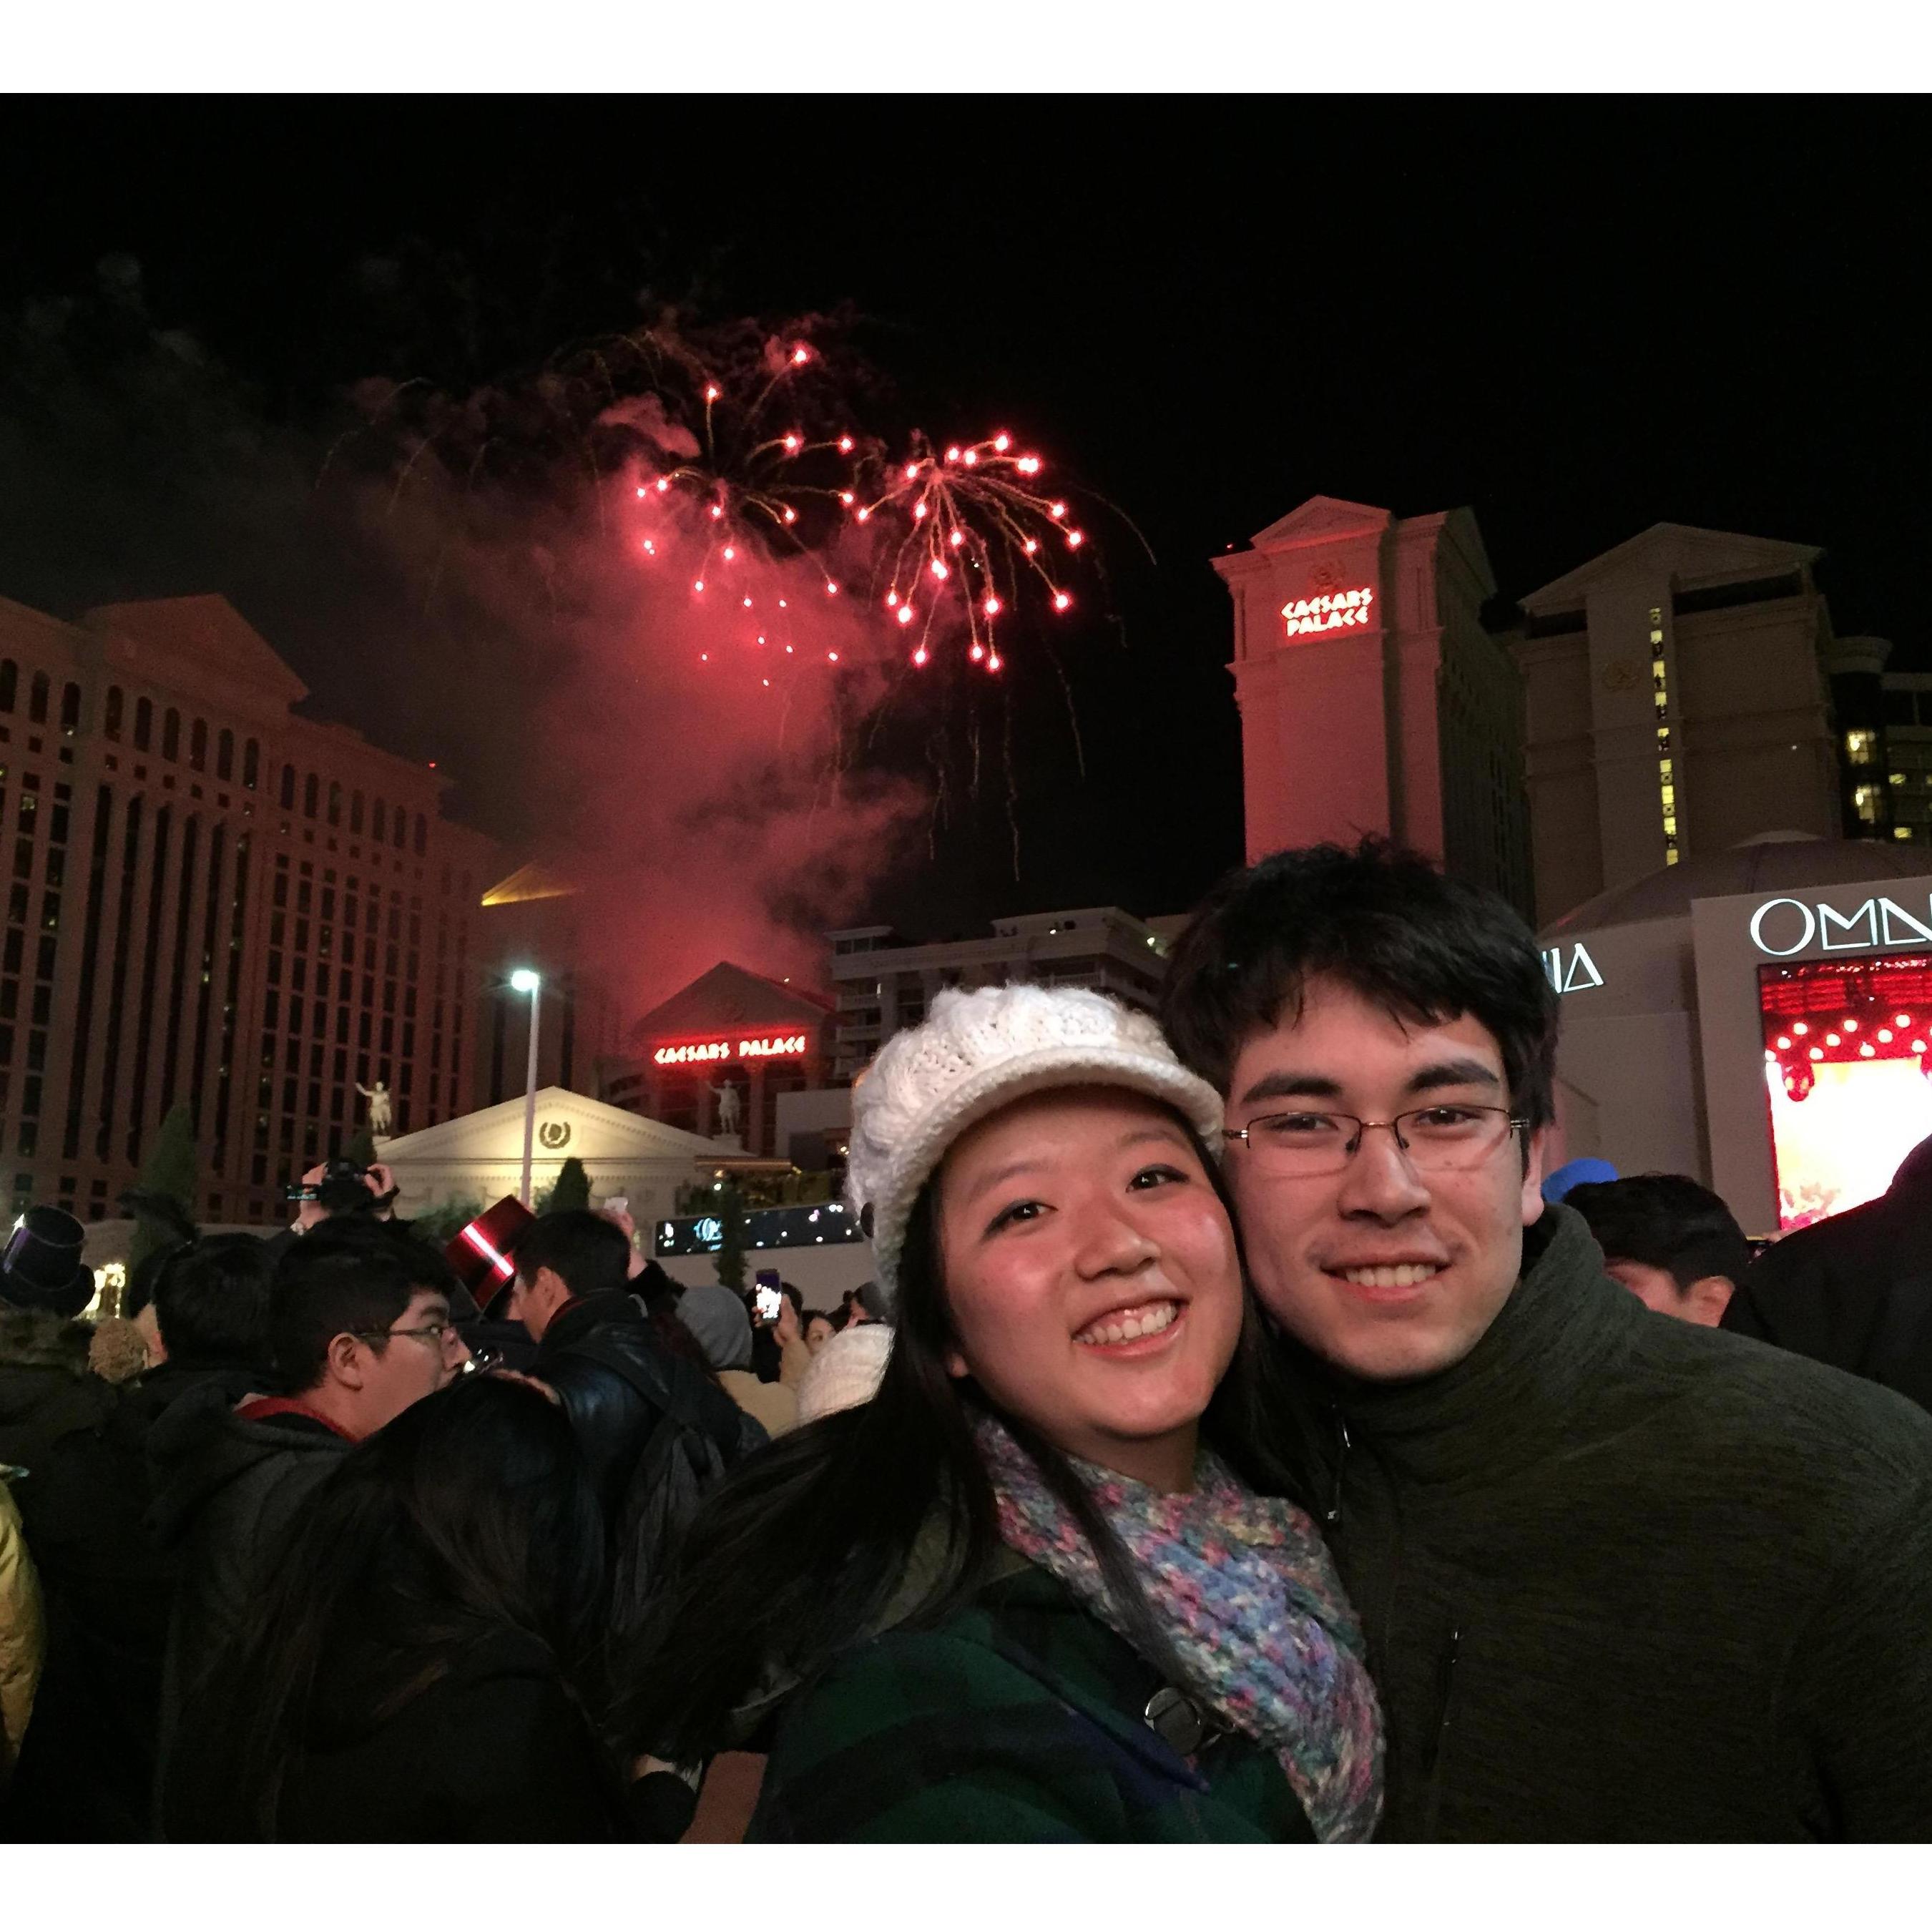 Ringing in the New Year with fireworks on the Las Vegas strip (New Year's Eve 2015)